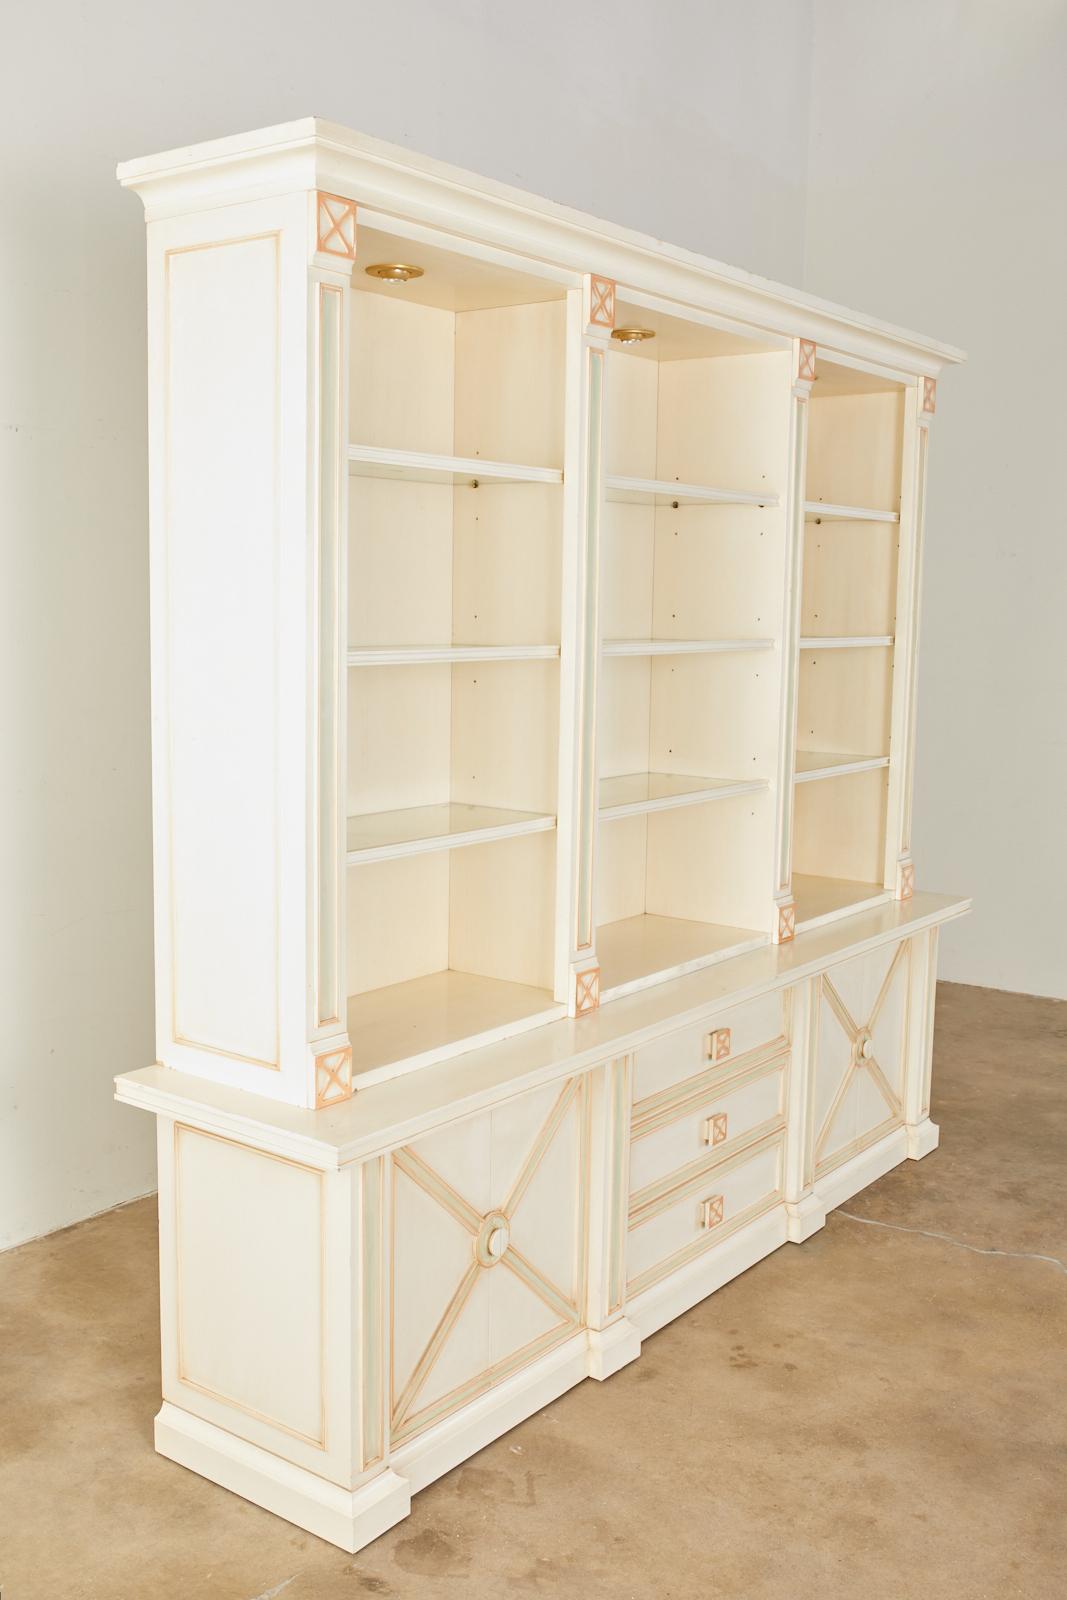 Large late 20th century Italian two-part bookcase cabinet featuring a painted finish with a neoclassical motif. The top of the case is fitted with nine glass shelves with adjustable height brackets. The corniced top has small brass finished lights